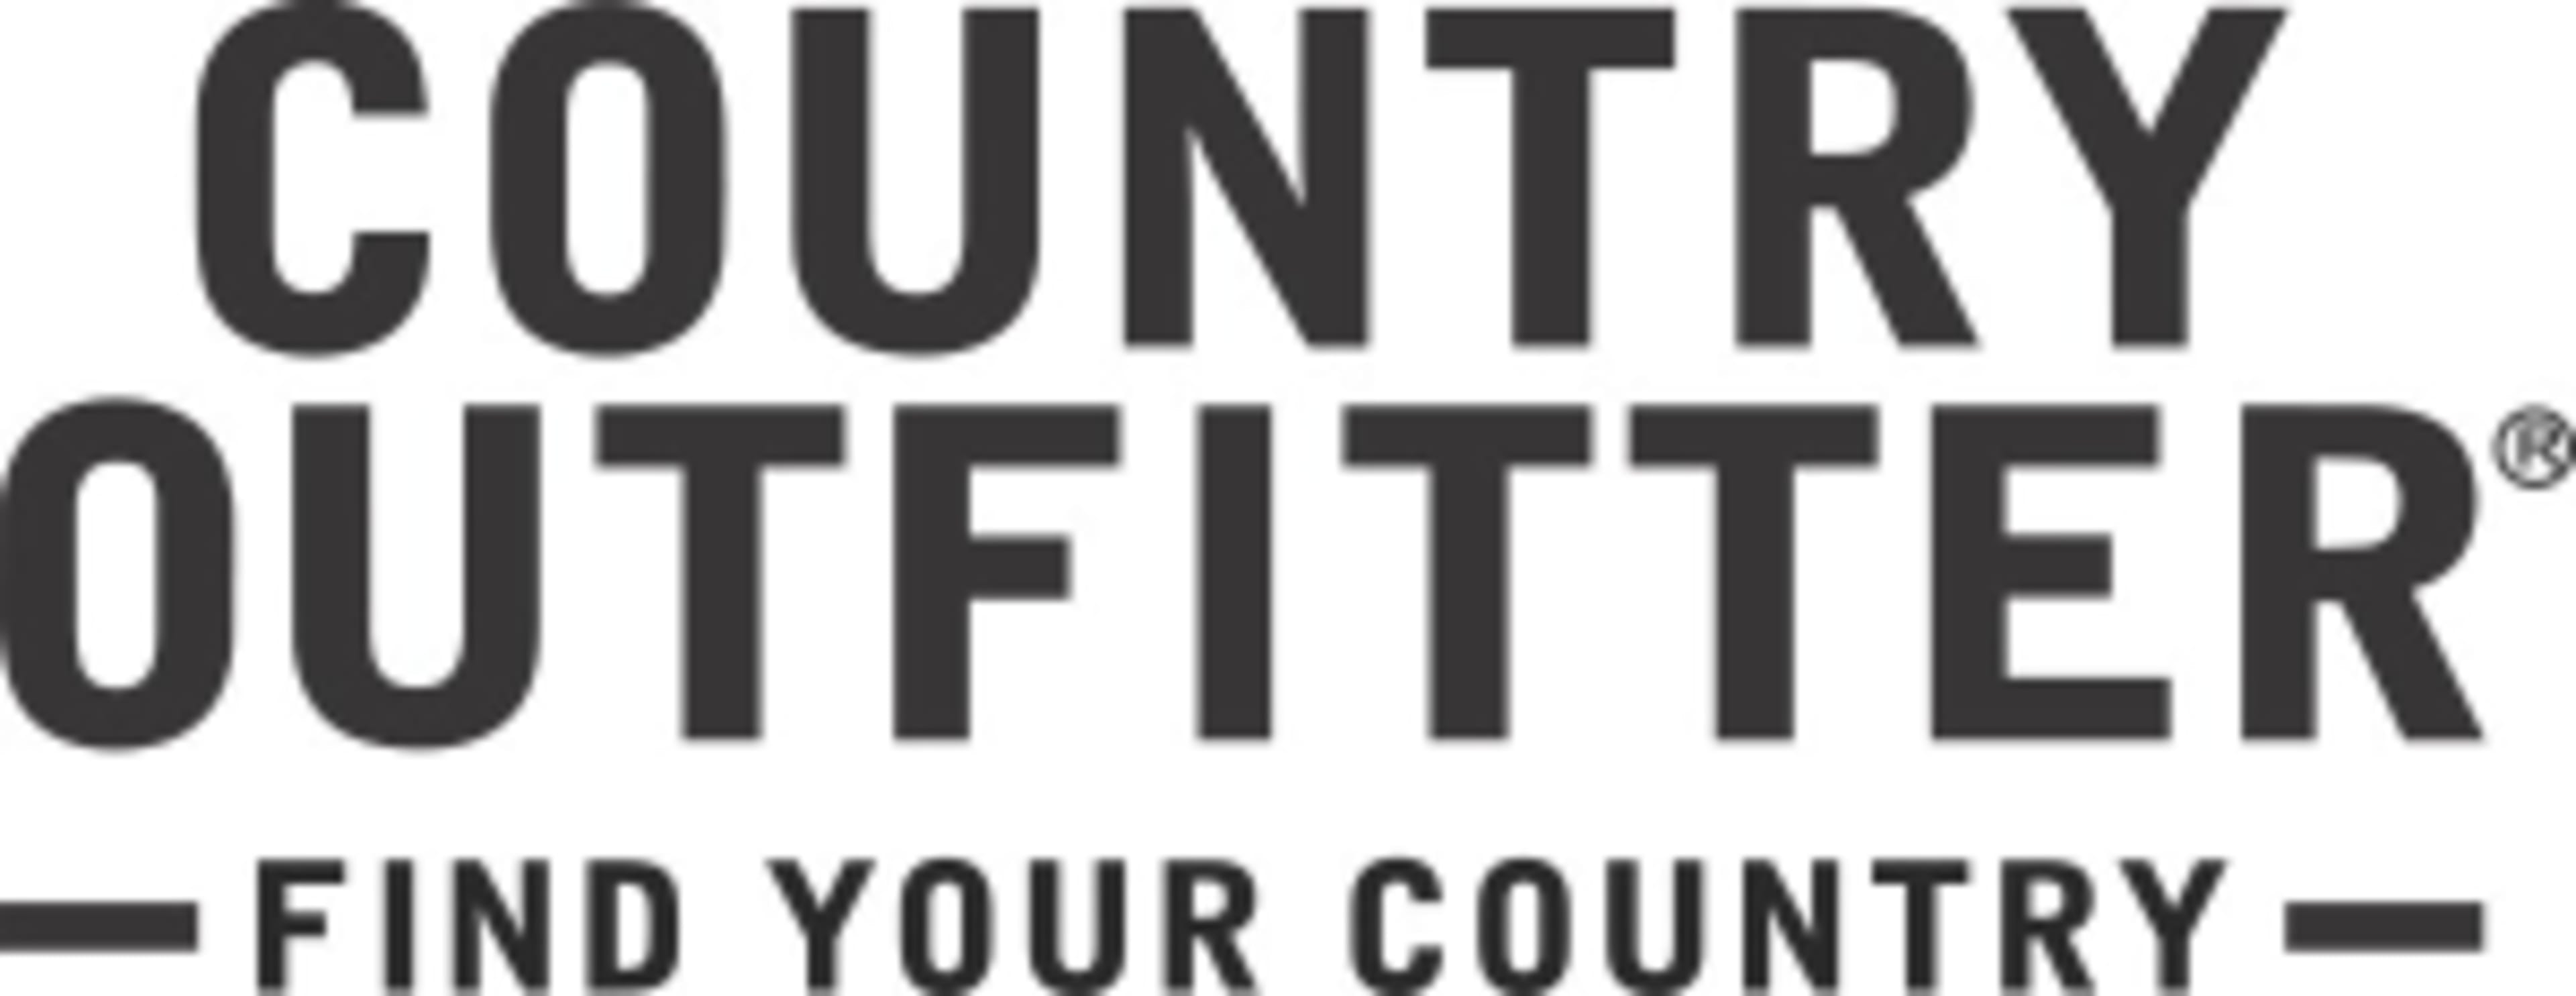 Country Outfitter Code